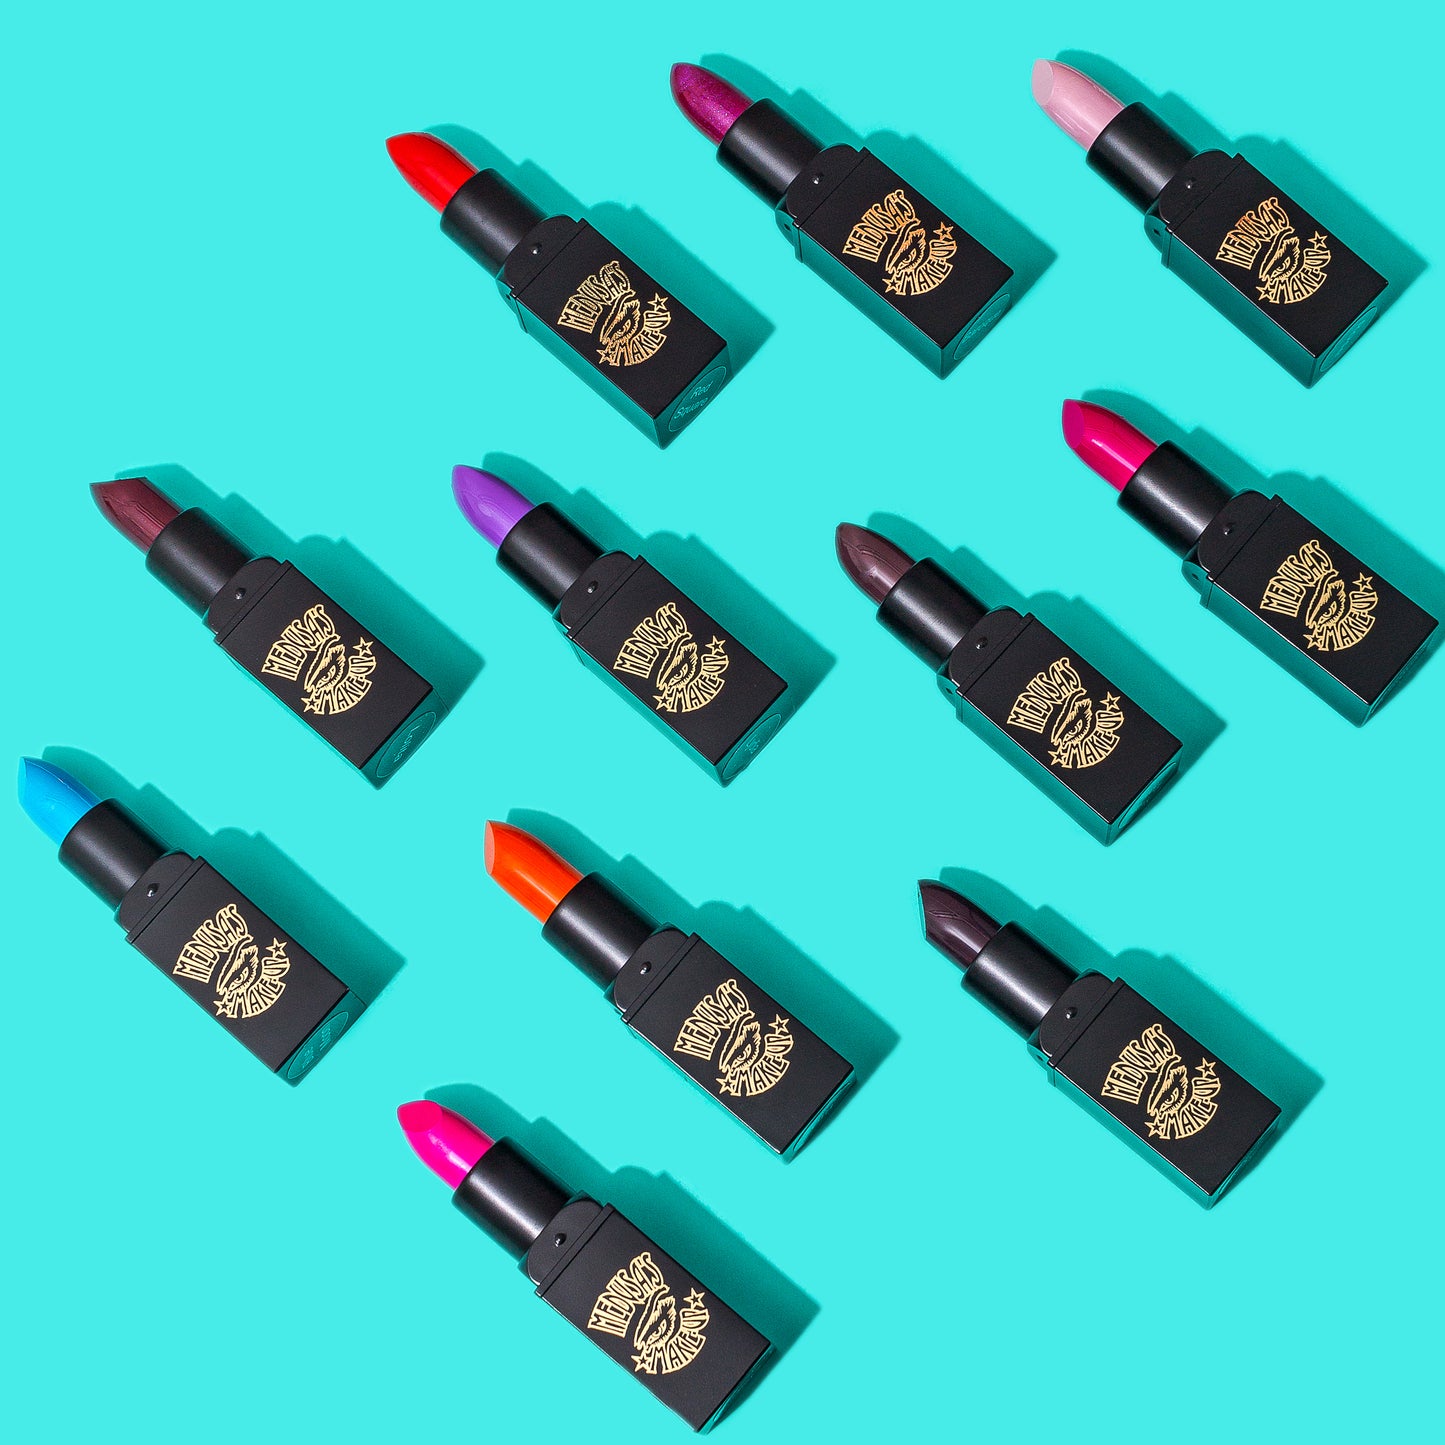 Lipstick collection of 11